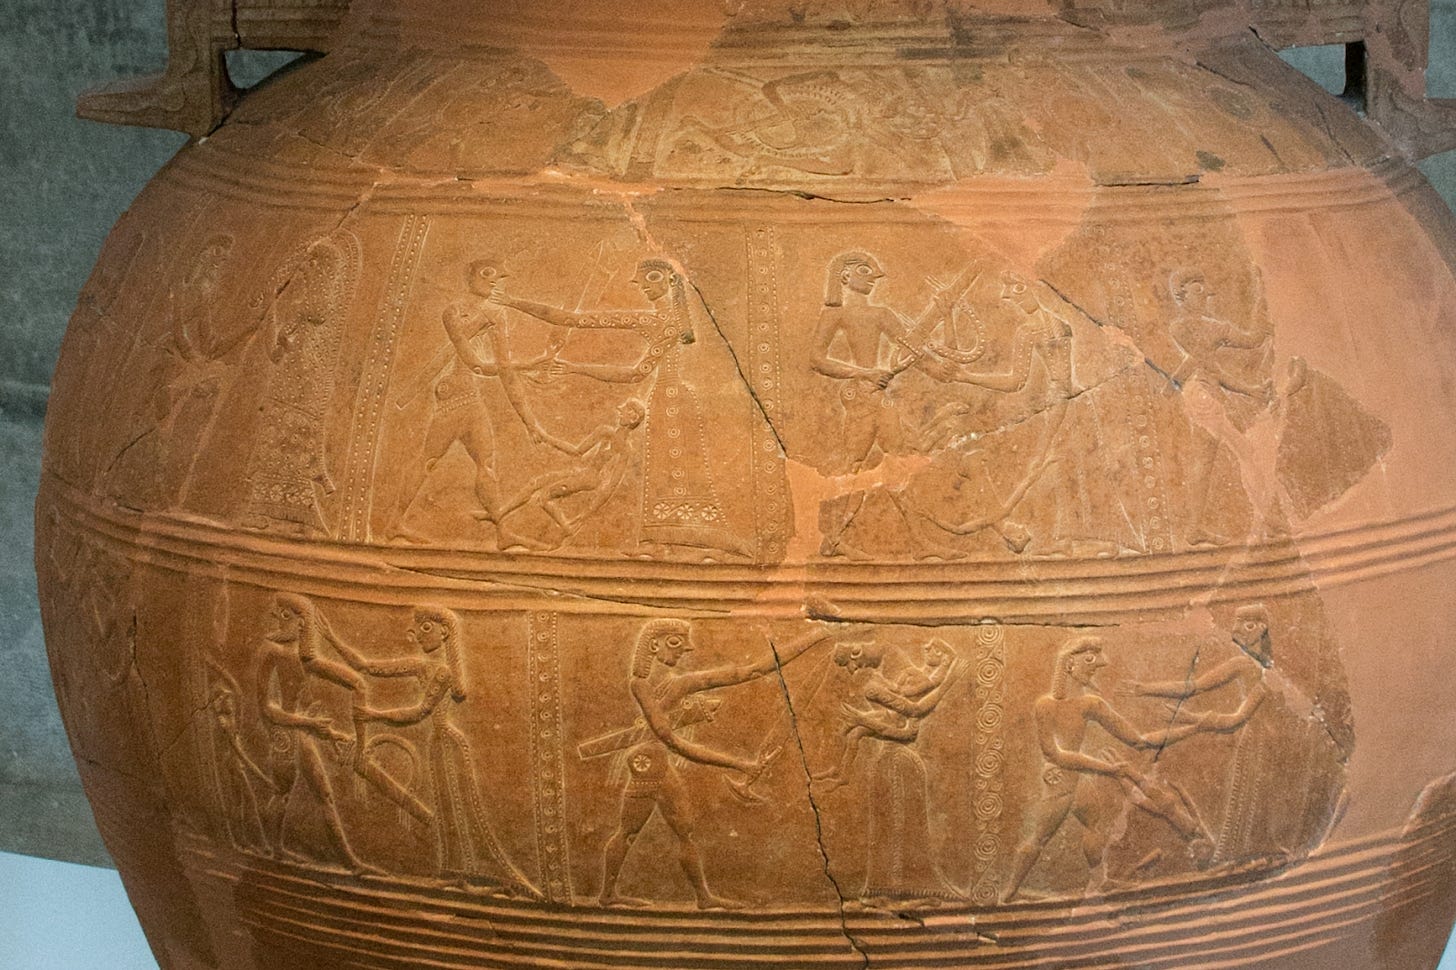 Photograph of a figured panel from a clay vase showing a warrior swinging an infant in a sequence 